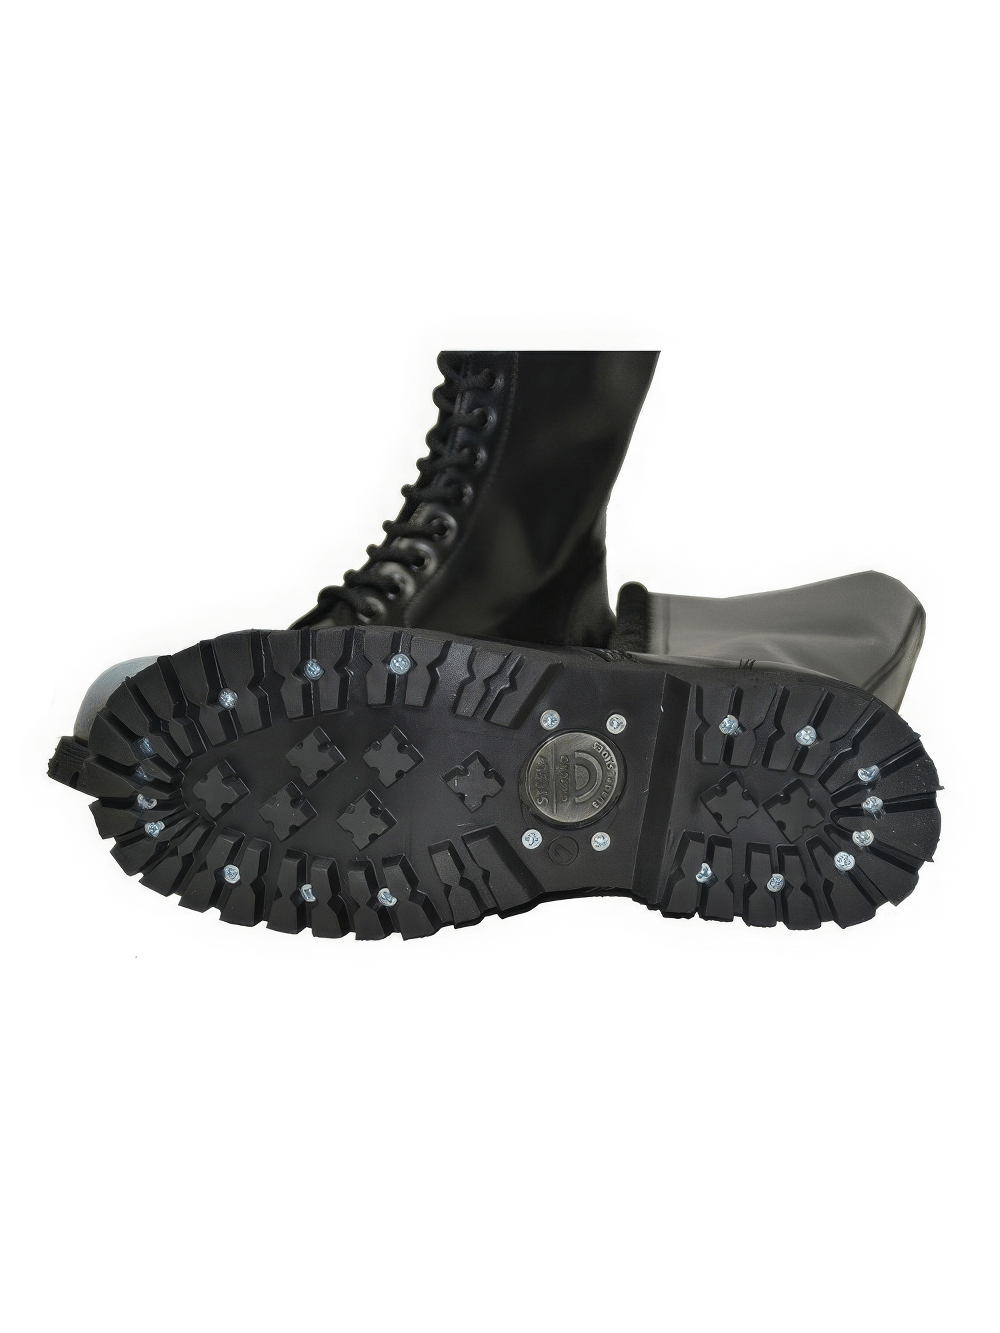 Black 20-Hole Rangers with Steel Toe and Wedge Soles